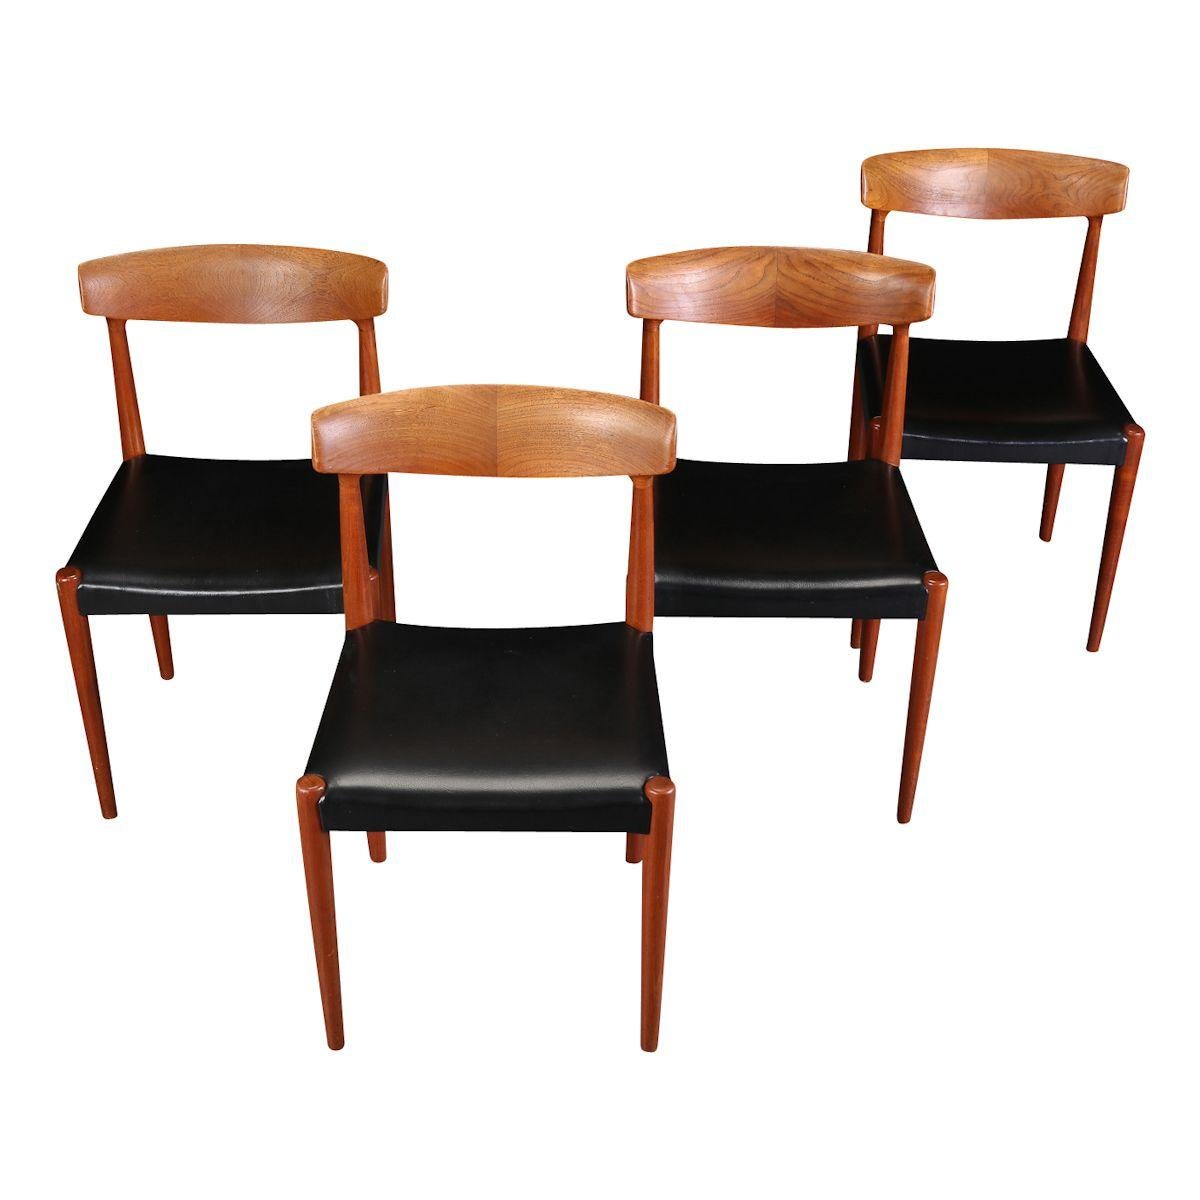 Stylish vintage dining chairs designed by Knud Faerch for Danish manufacturer Slagelse Møbelfabrik. These model 343 chairs feature a typical midcentury Danish organic design, solid teak backrests and beautiful black leather upholstery. This gorgeous